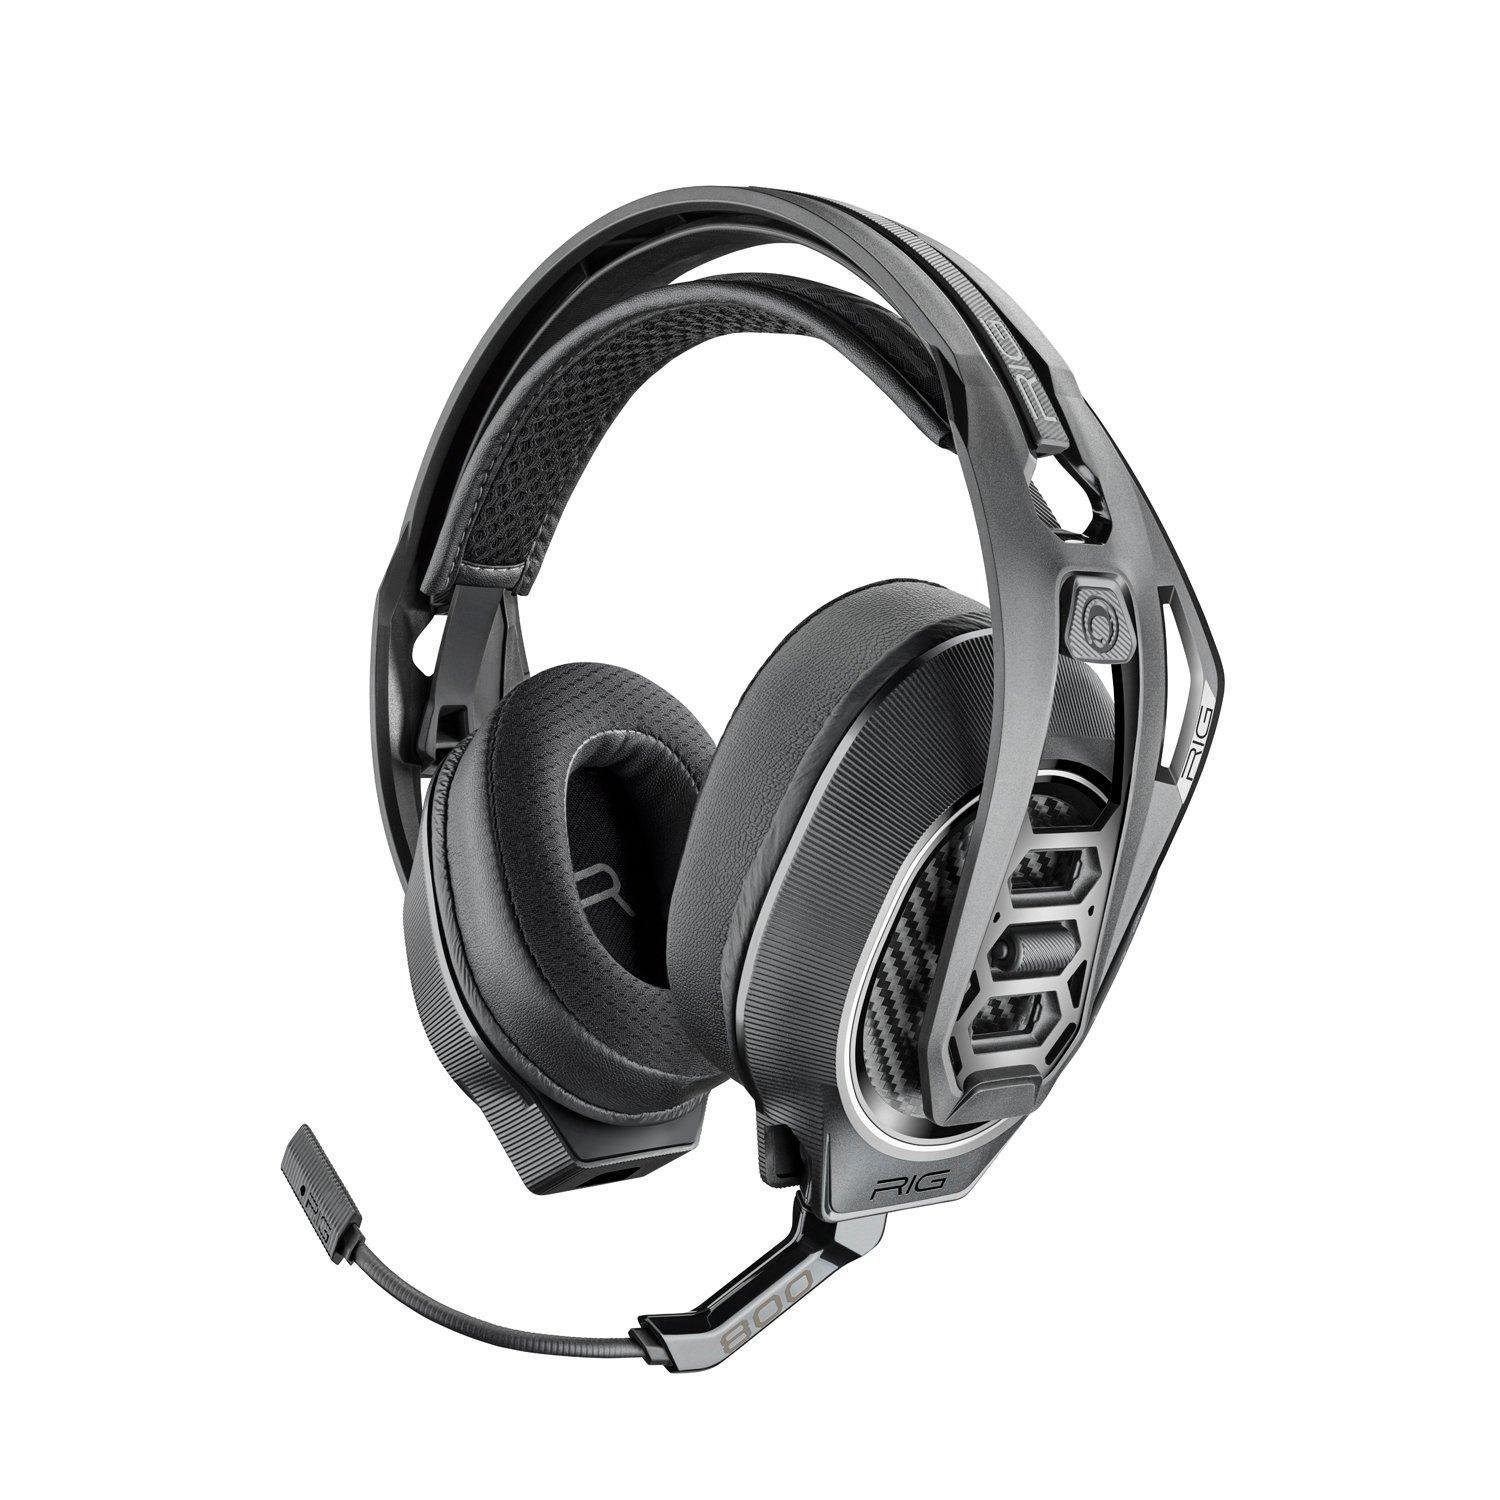 RIG - 800 Pro HX Wireless Gaming Headset for Xbox with Charging Base